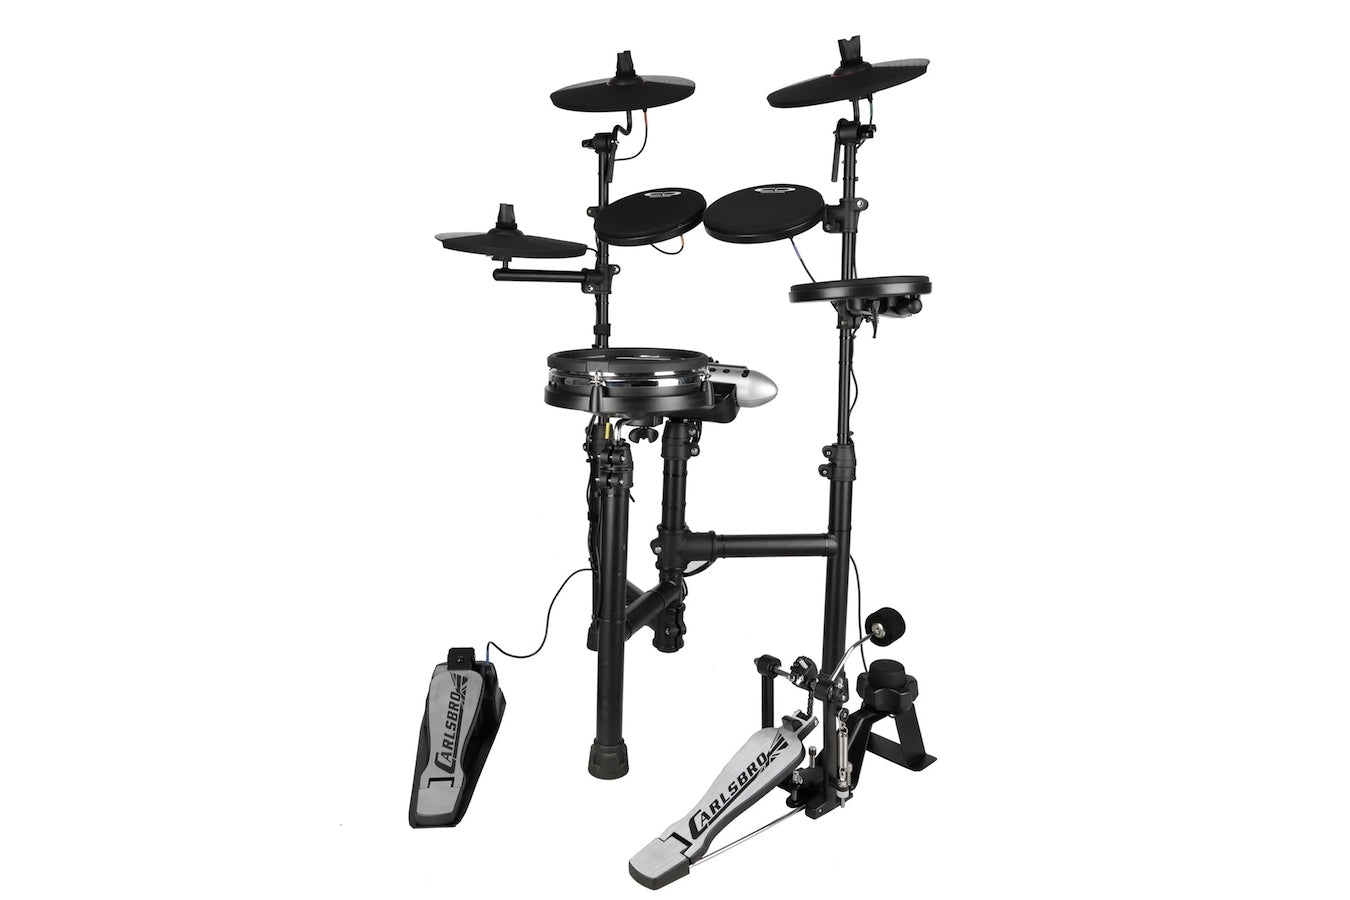 Space Saving 8-Piece Electronic Drum Kit features an 8inch Mesh snare drum pad